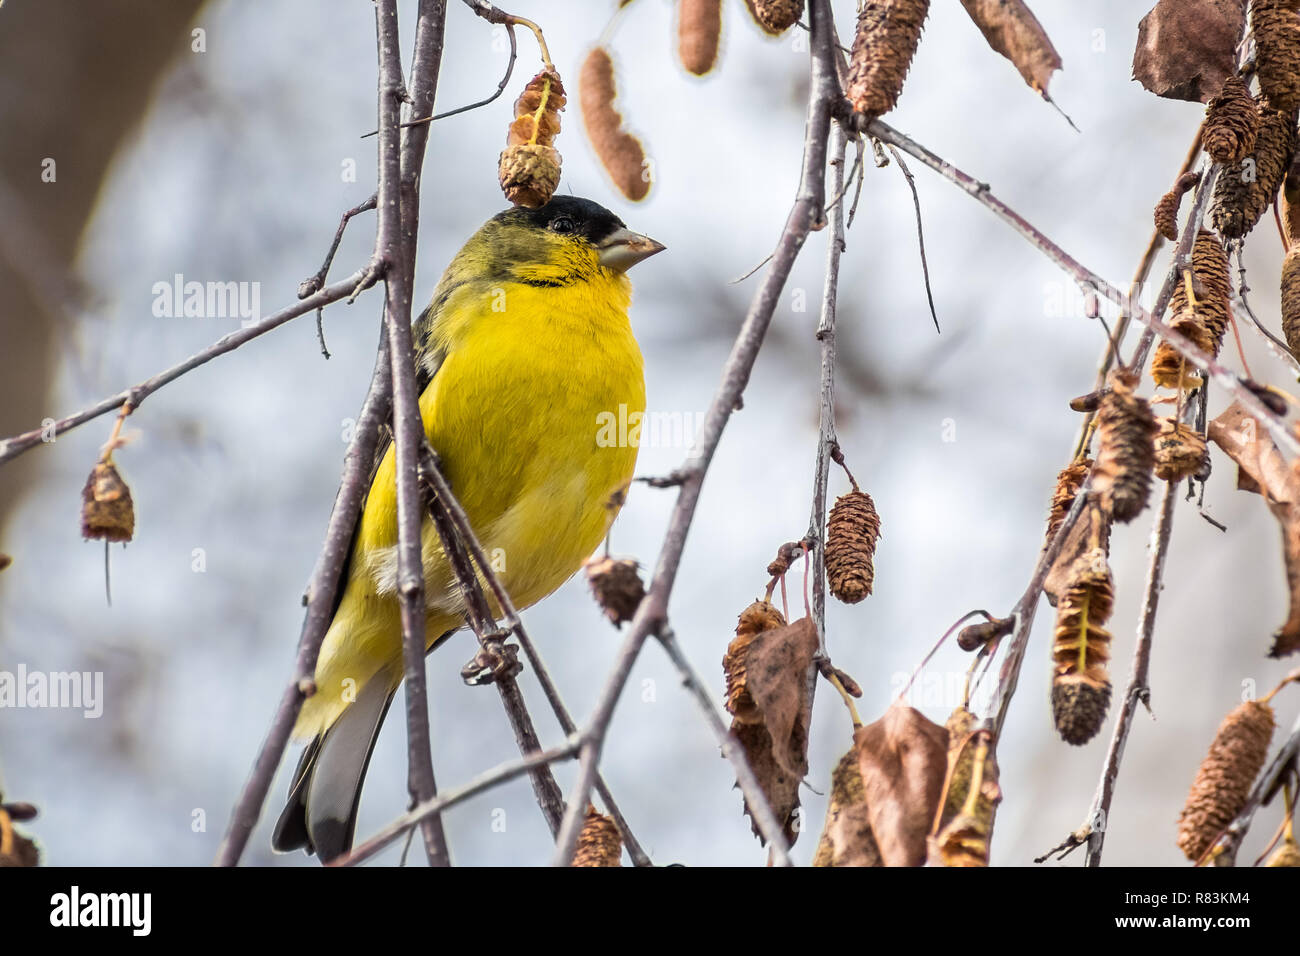 Male Lesser Goldfinch (Spinus psaltria) perched on a branch in a birch tree, south San Francisco bay area, California Stock Photo